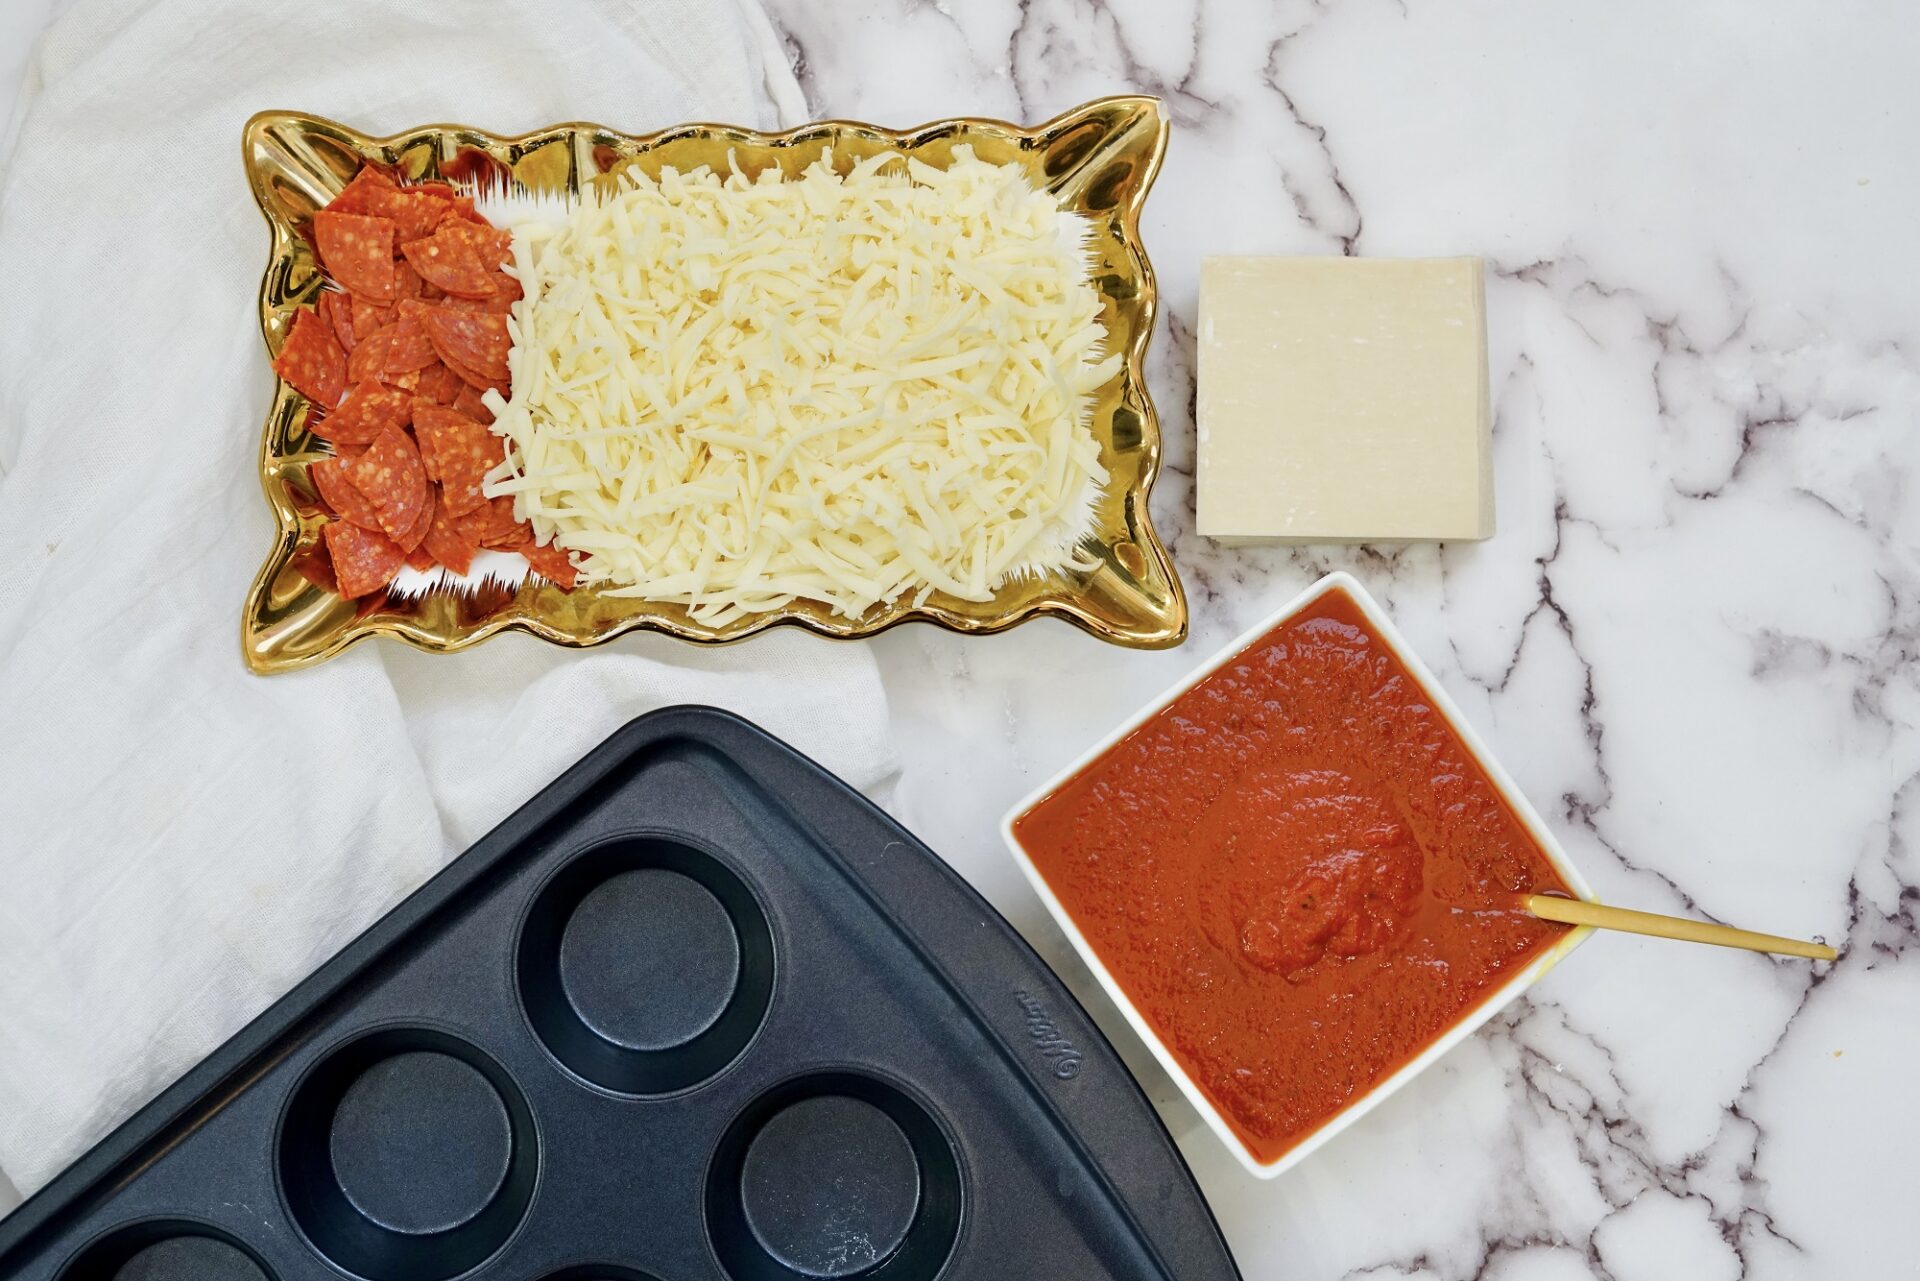 ingredients for wonton pizzas on a counter with a muffin tin.